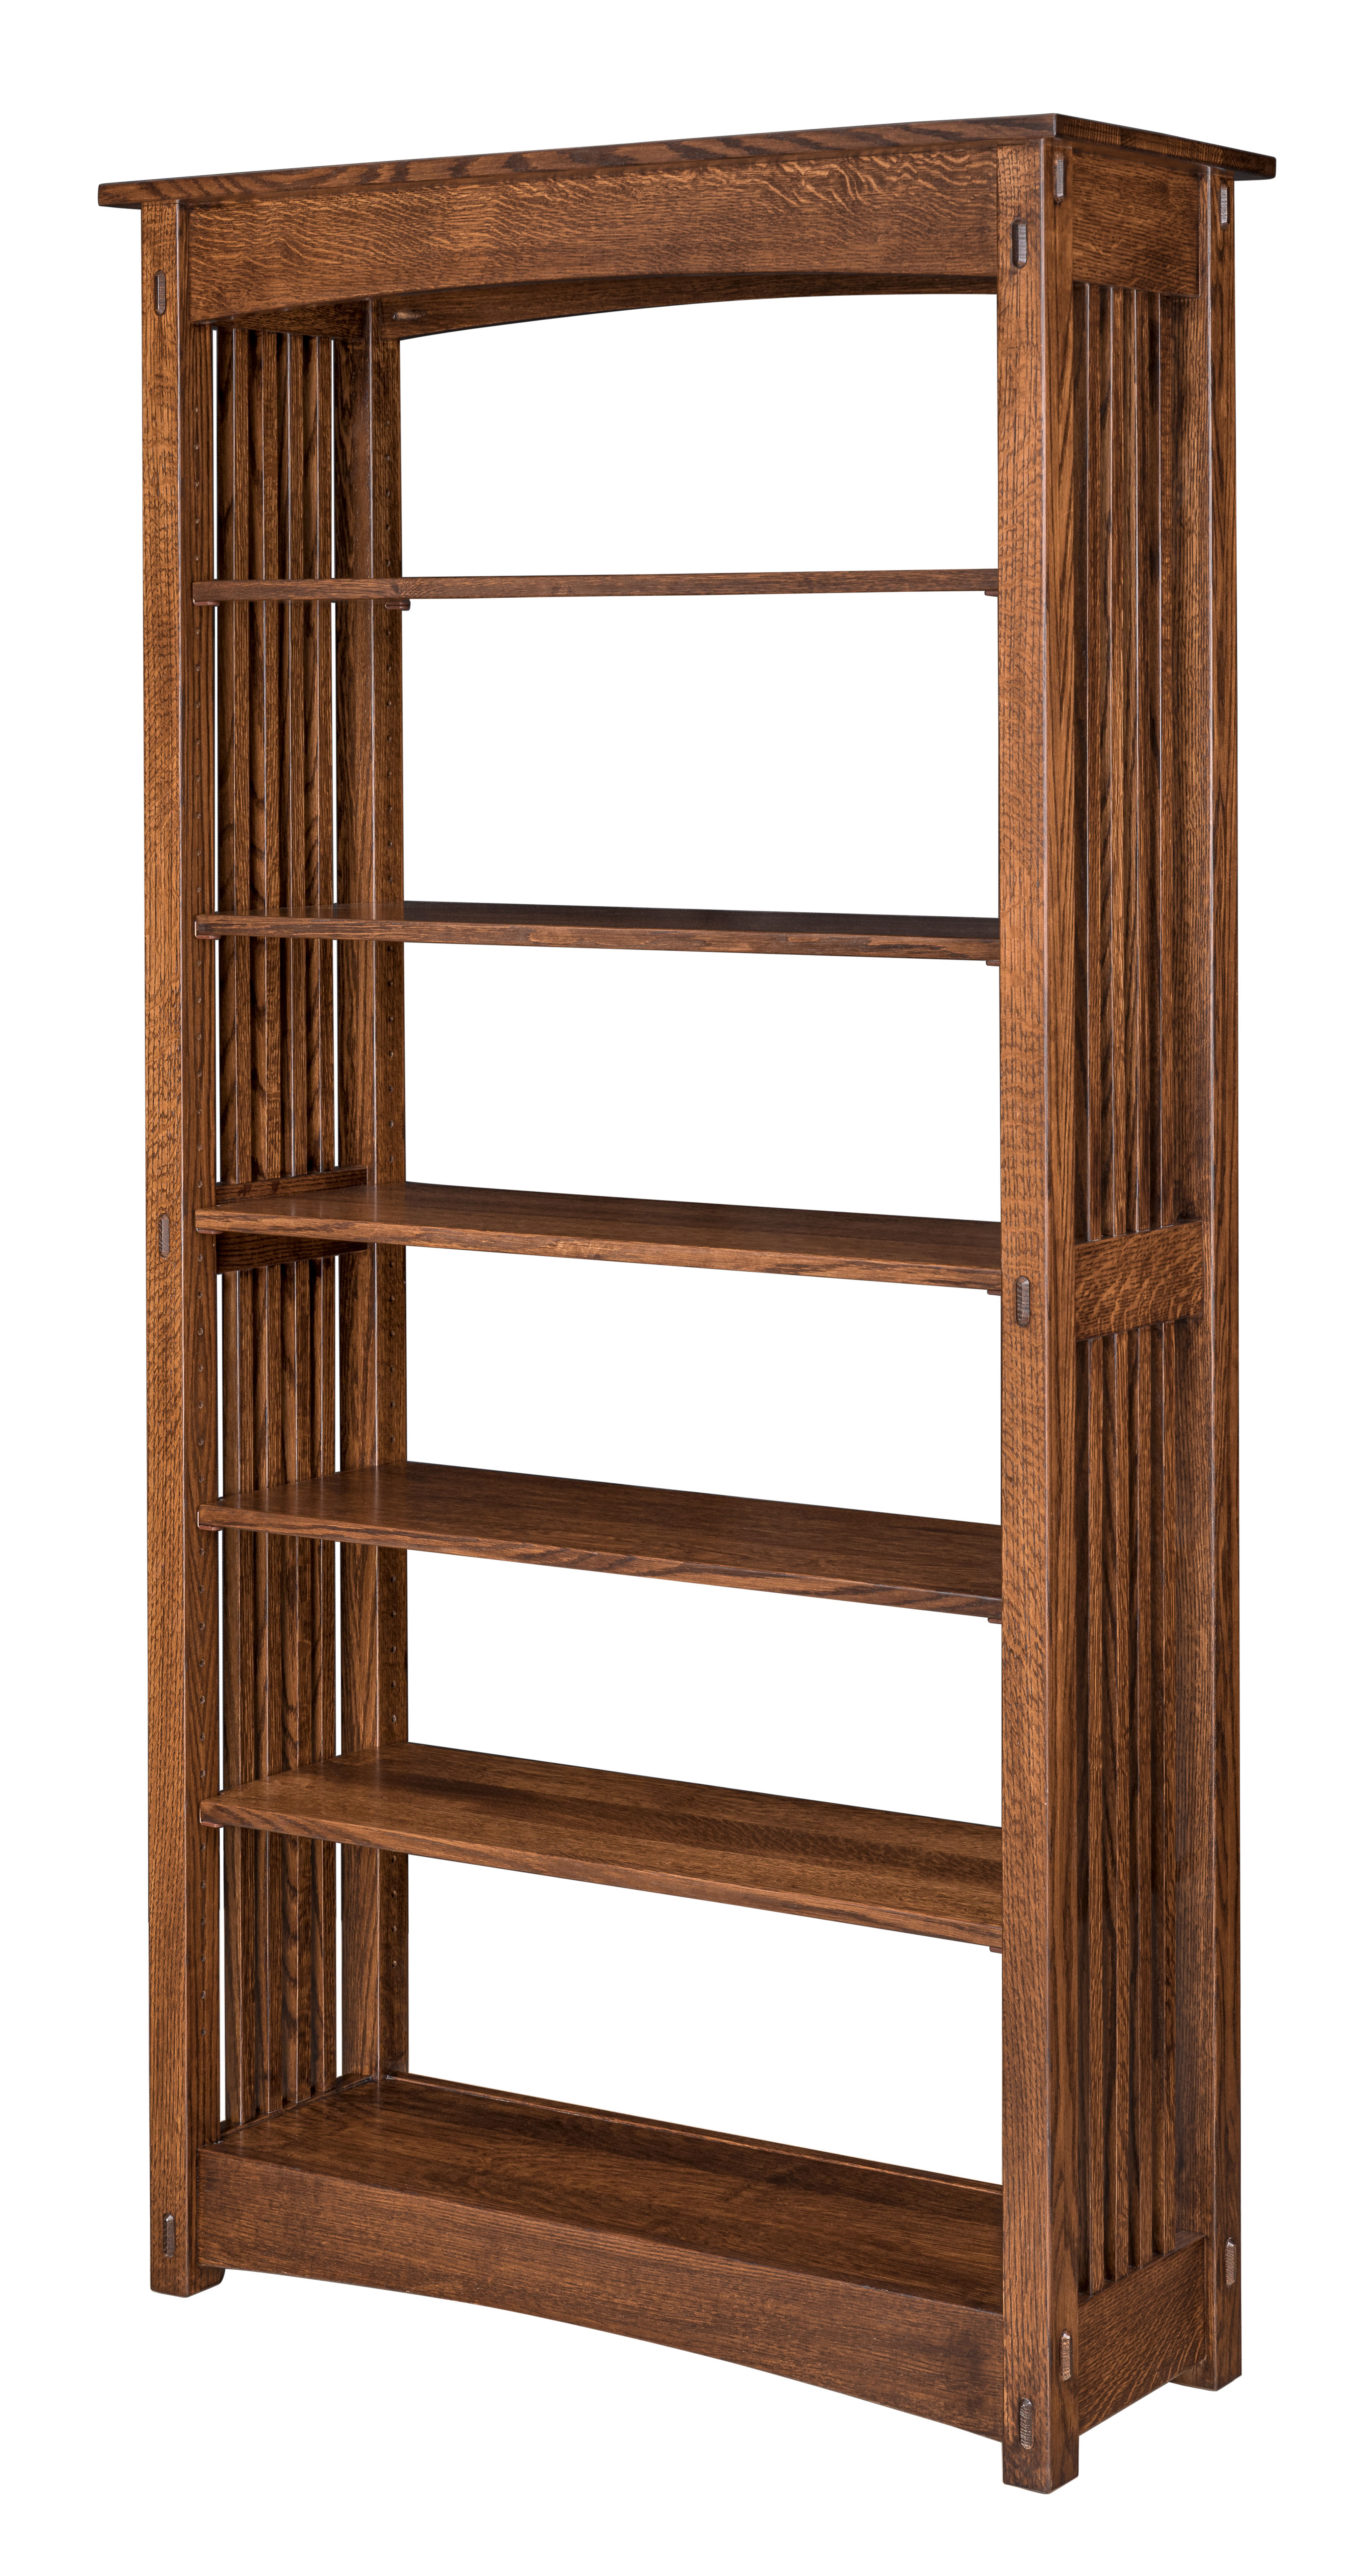 Signature Mission Bookcase Amish, Solid Wood Bookcases